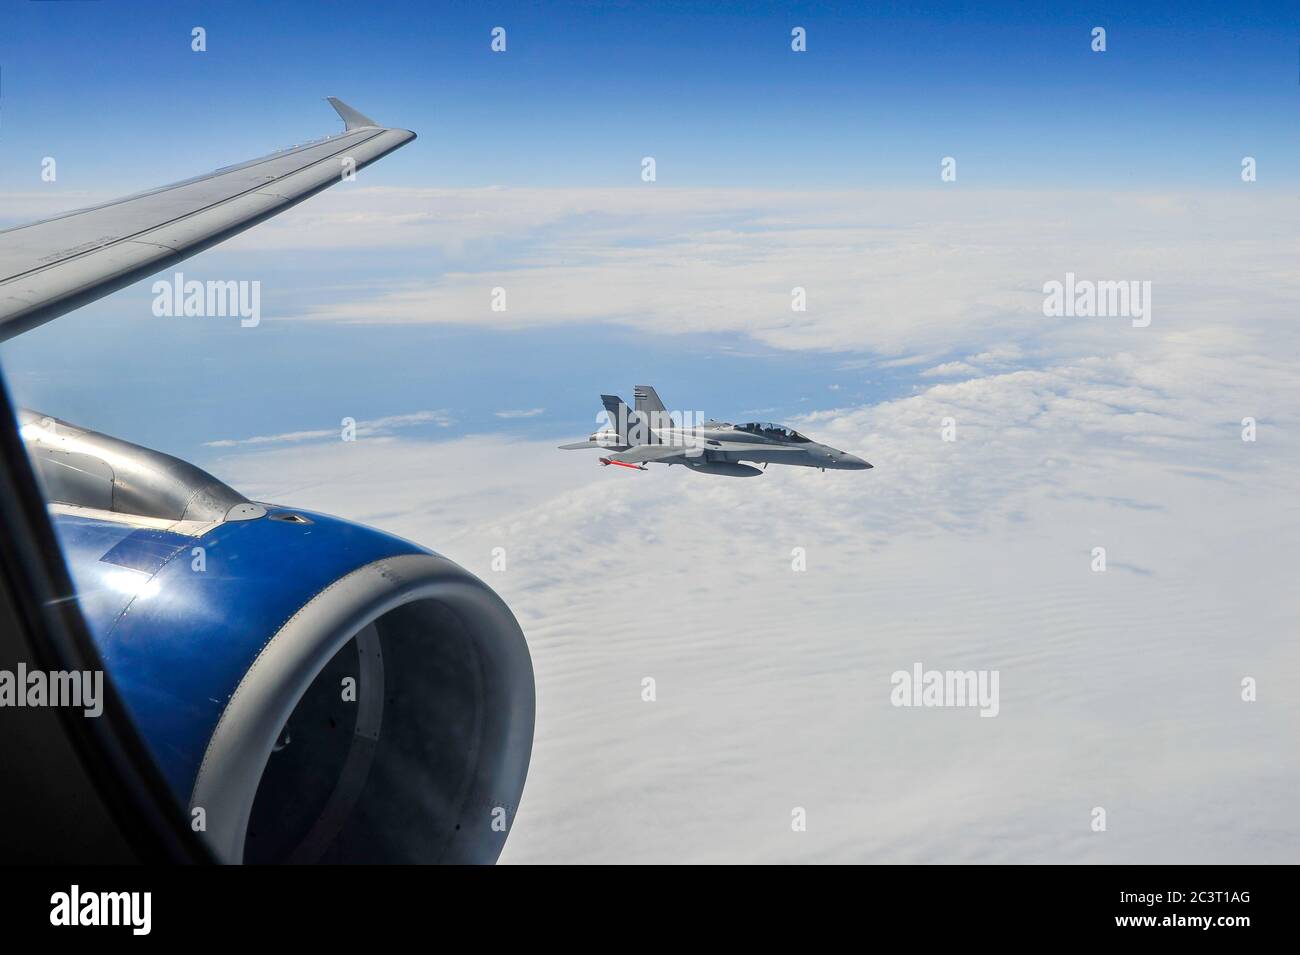 A view from inside passenger jetliner cabin of a military jet fighter escorting commercial aircraft at high altitude. Stock Photo